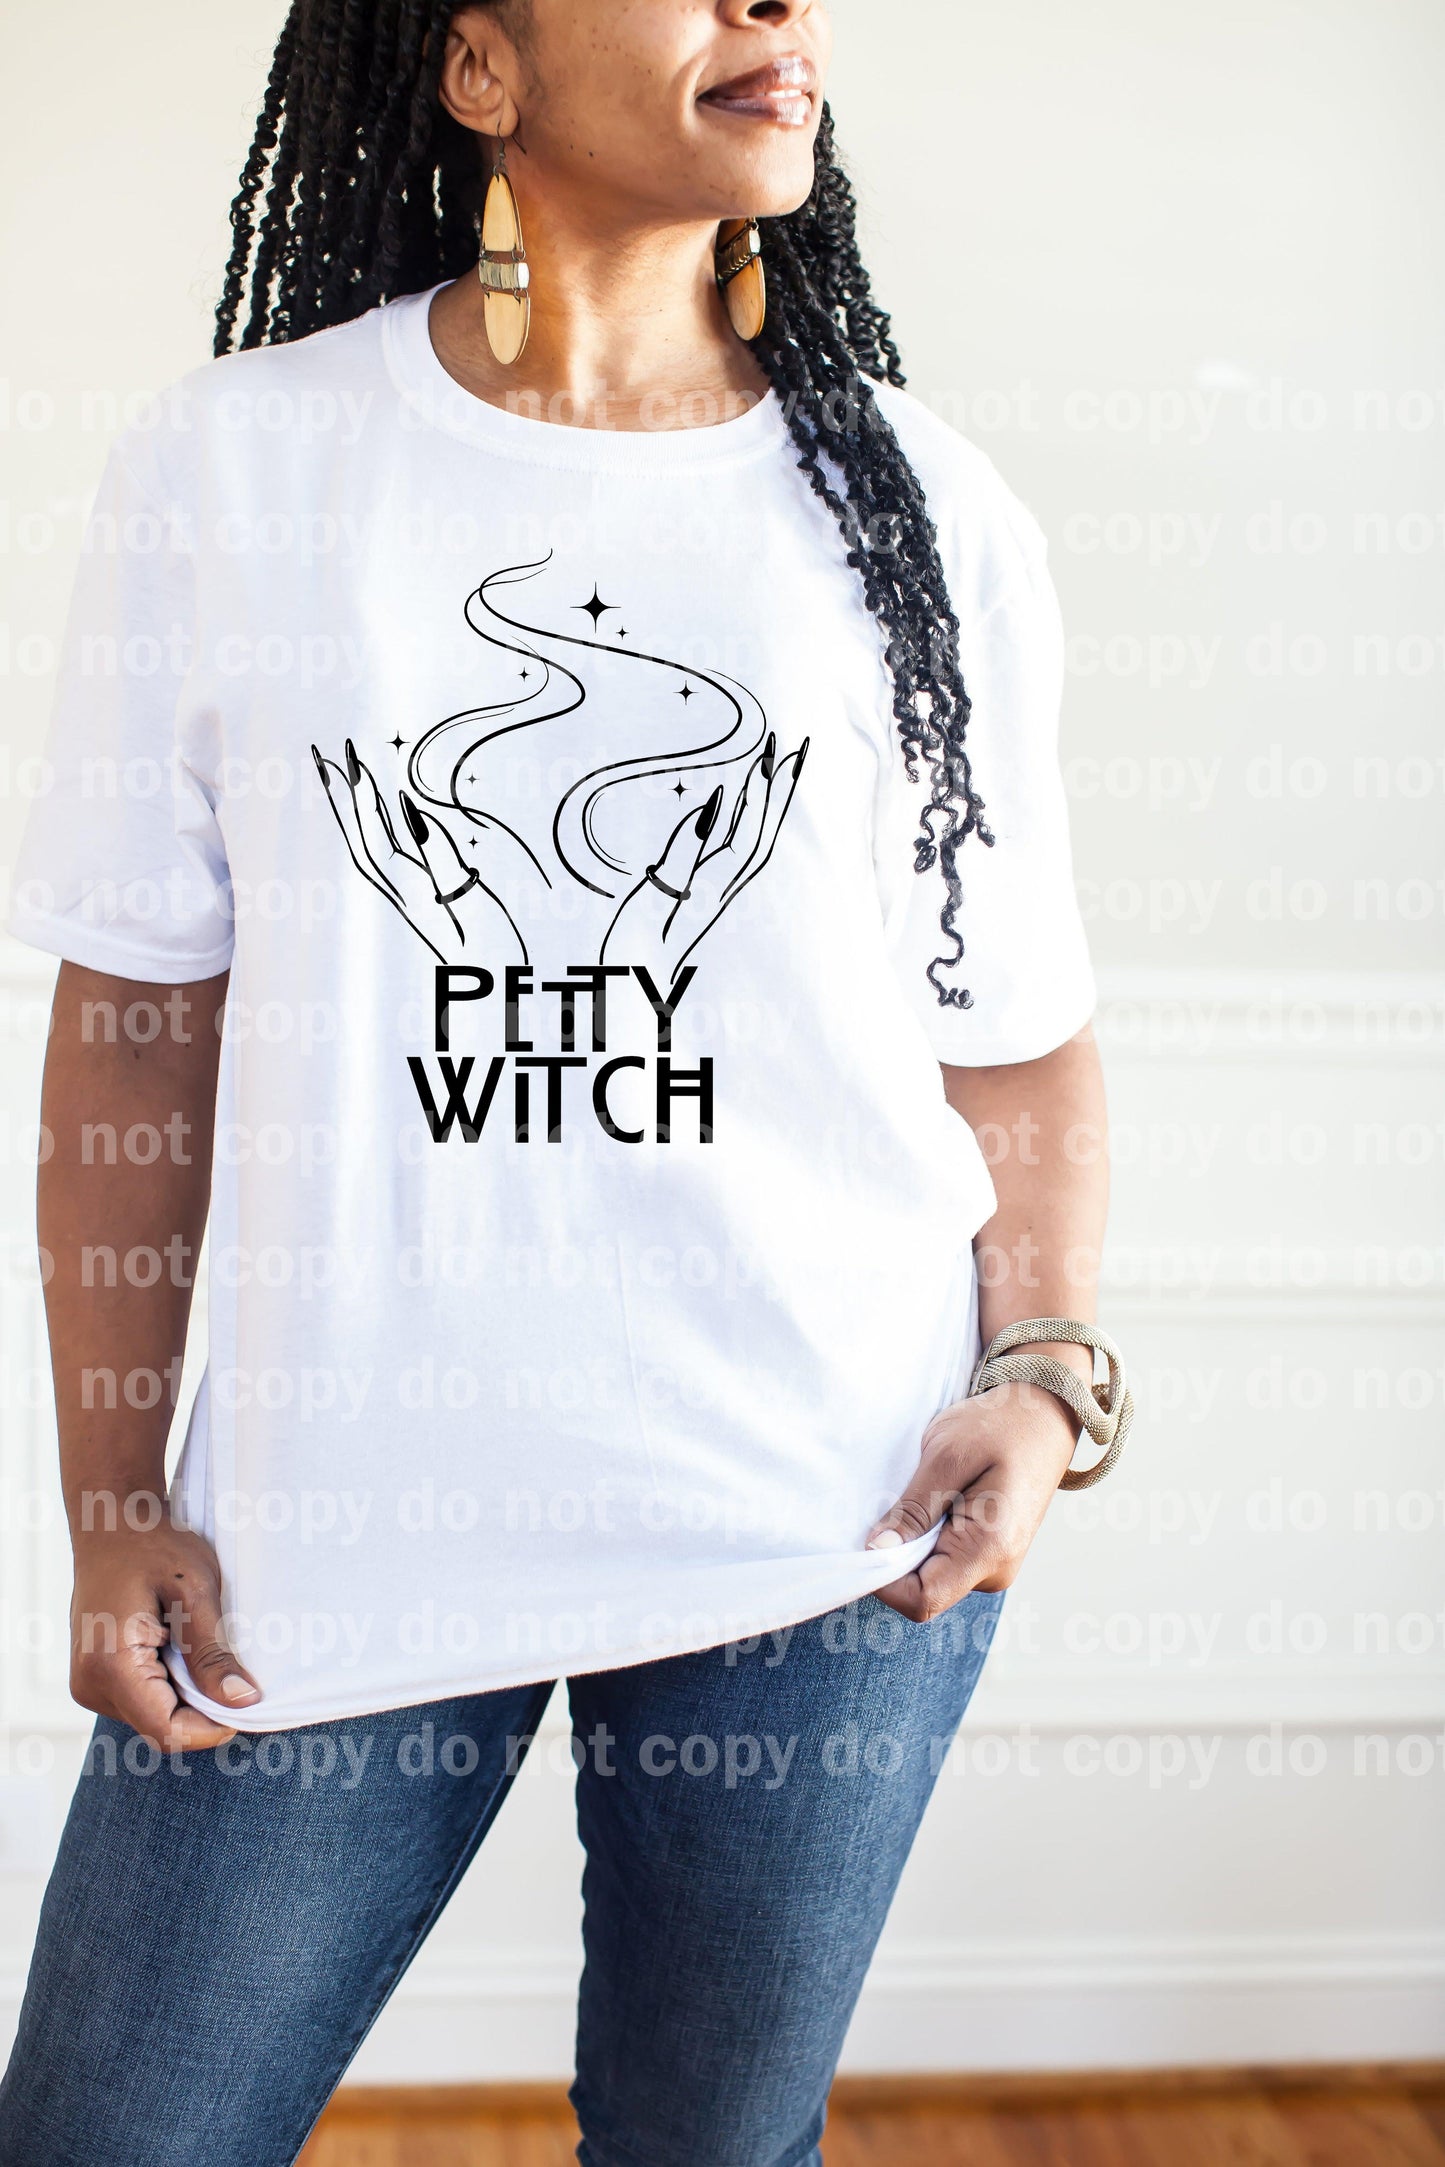 Petty Witch Hands Dream Print or Sublimation Print